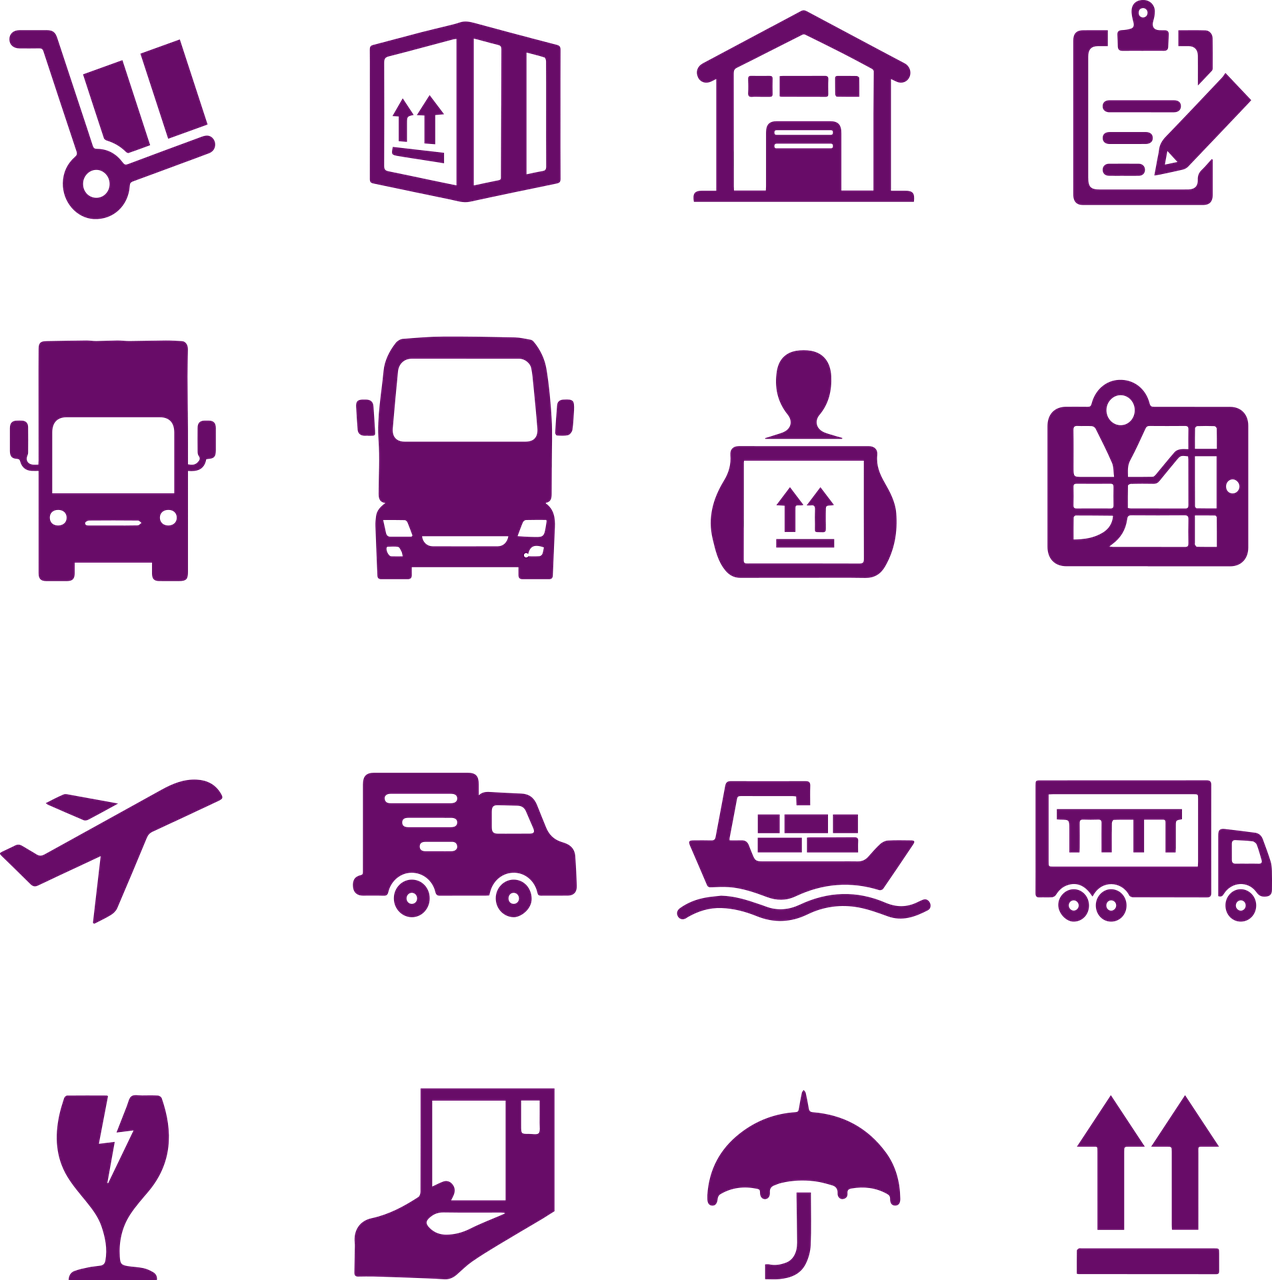 a bunch of purple icons on a black background, figuration libre, trucks, full pallet image, taken on an iphone, illustration